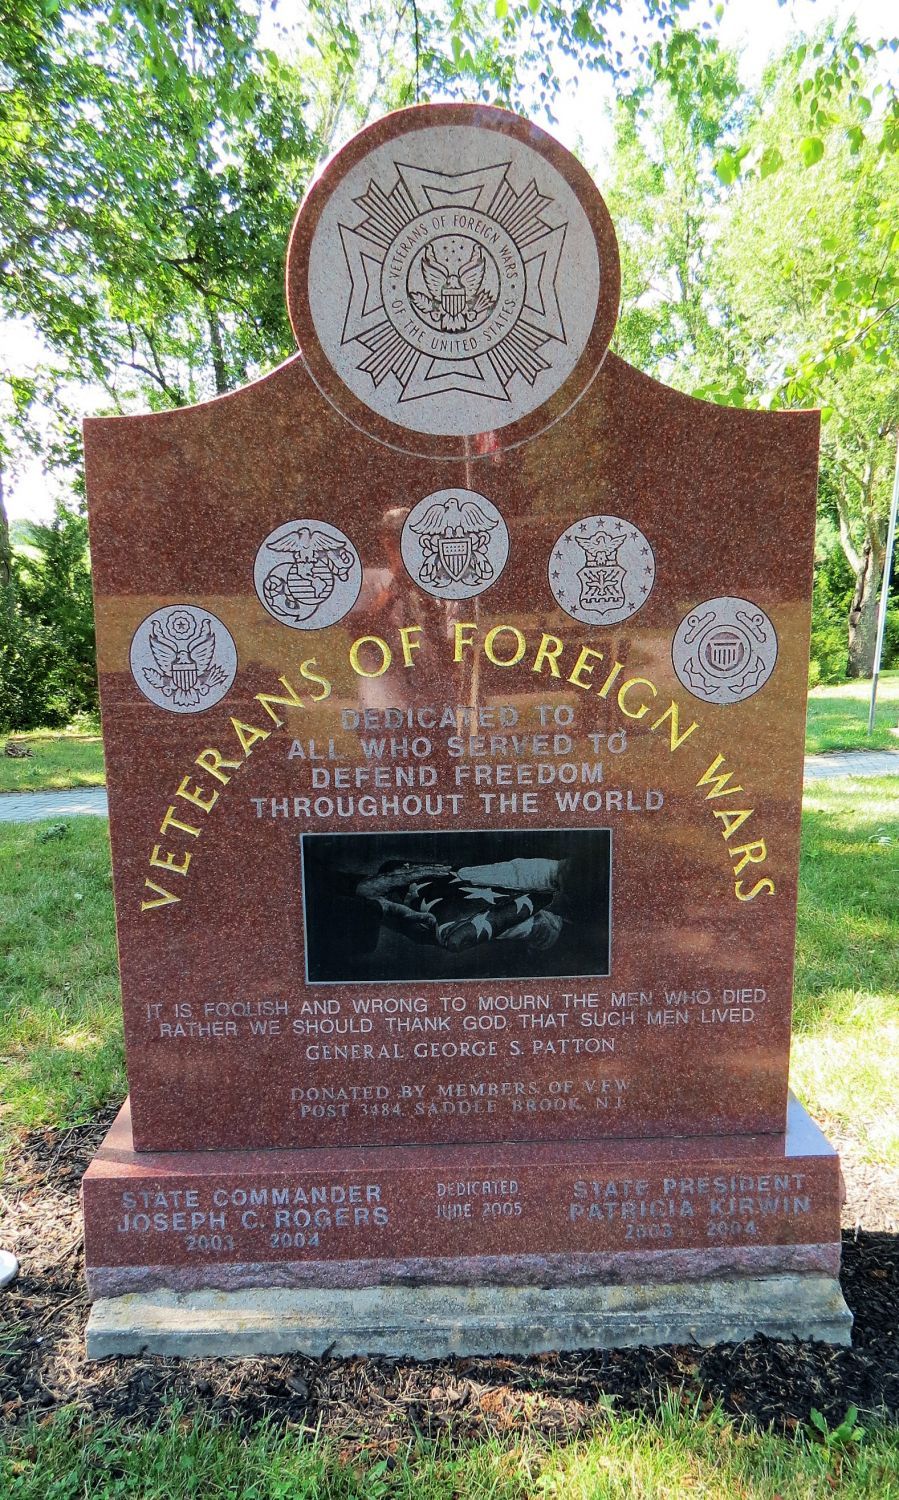 Veterans of Foreign Wars, Wrightstown, New Jersey